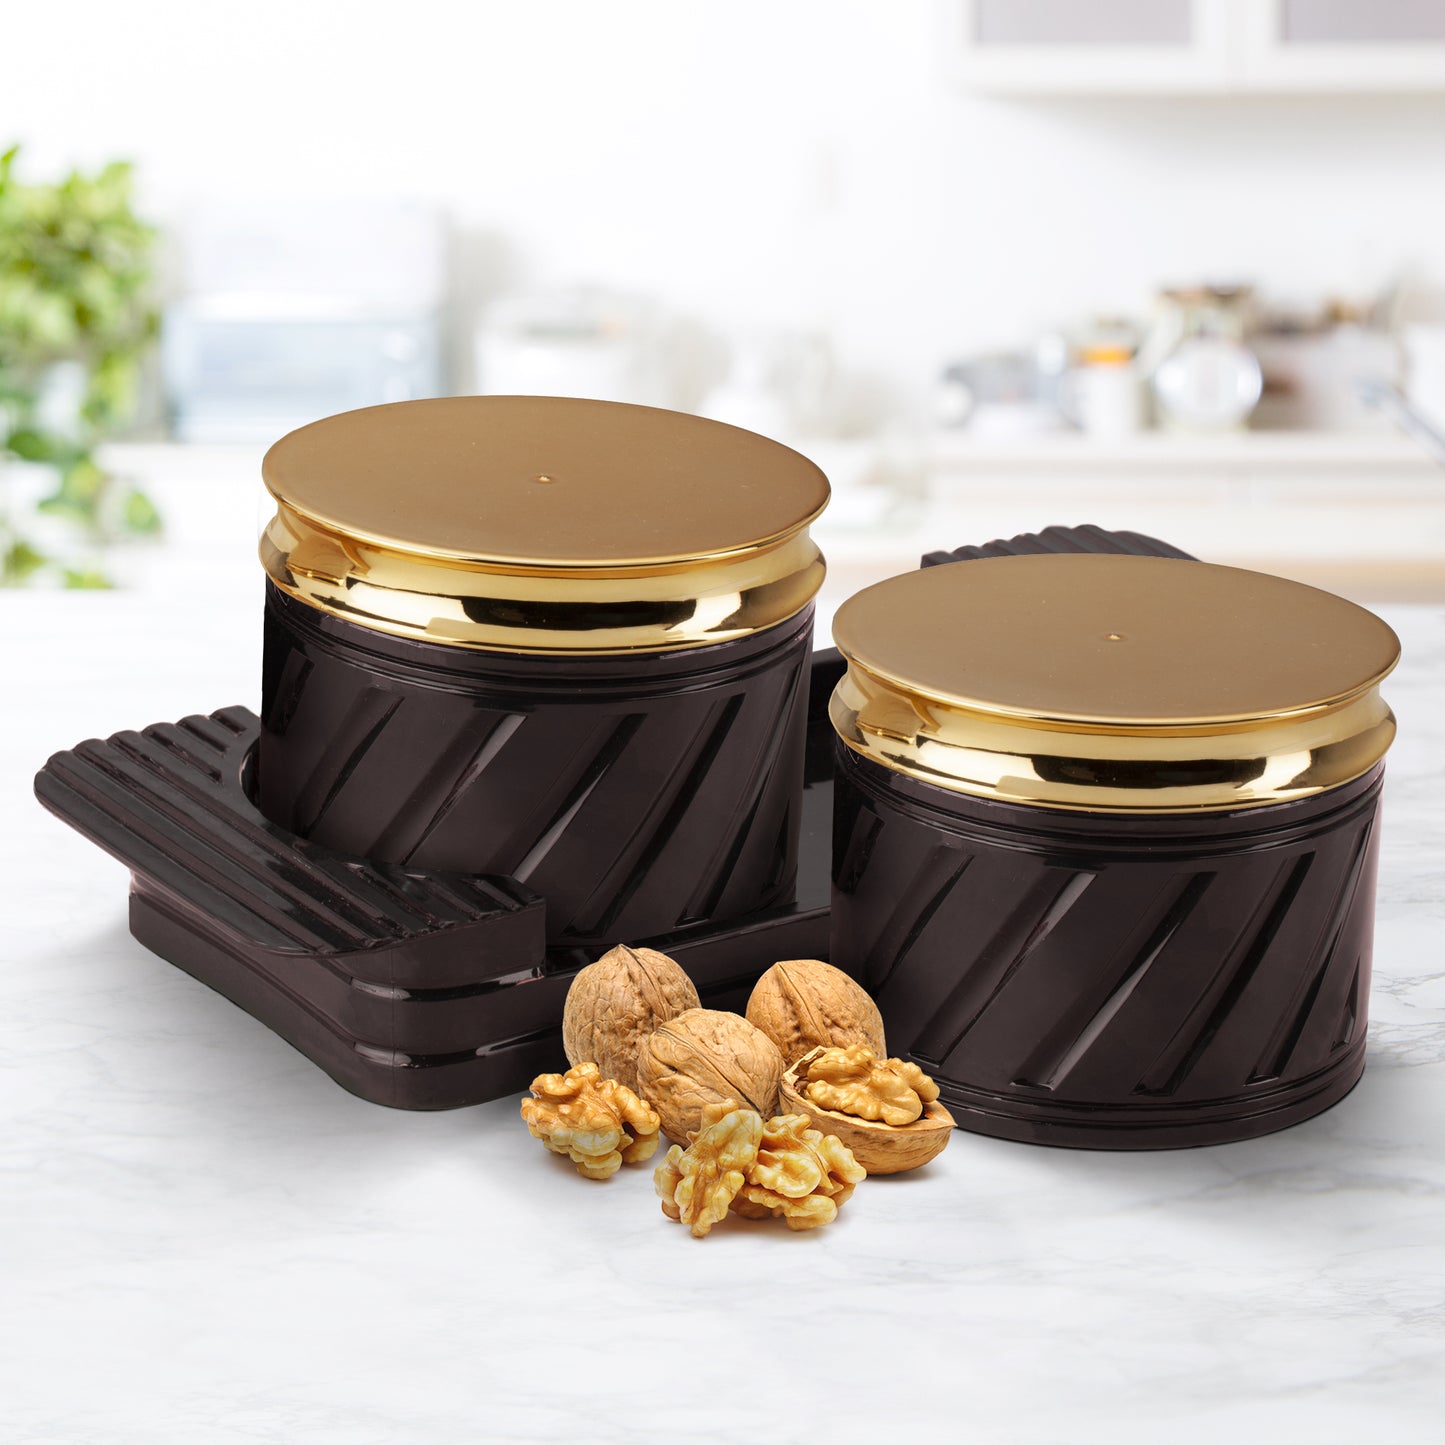 Elegance Container set of 2